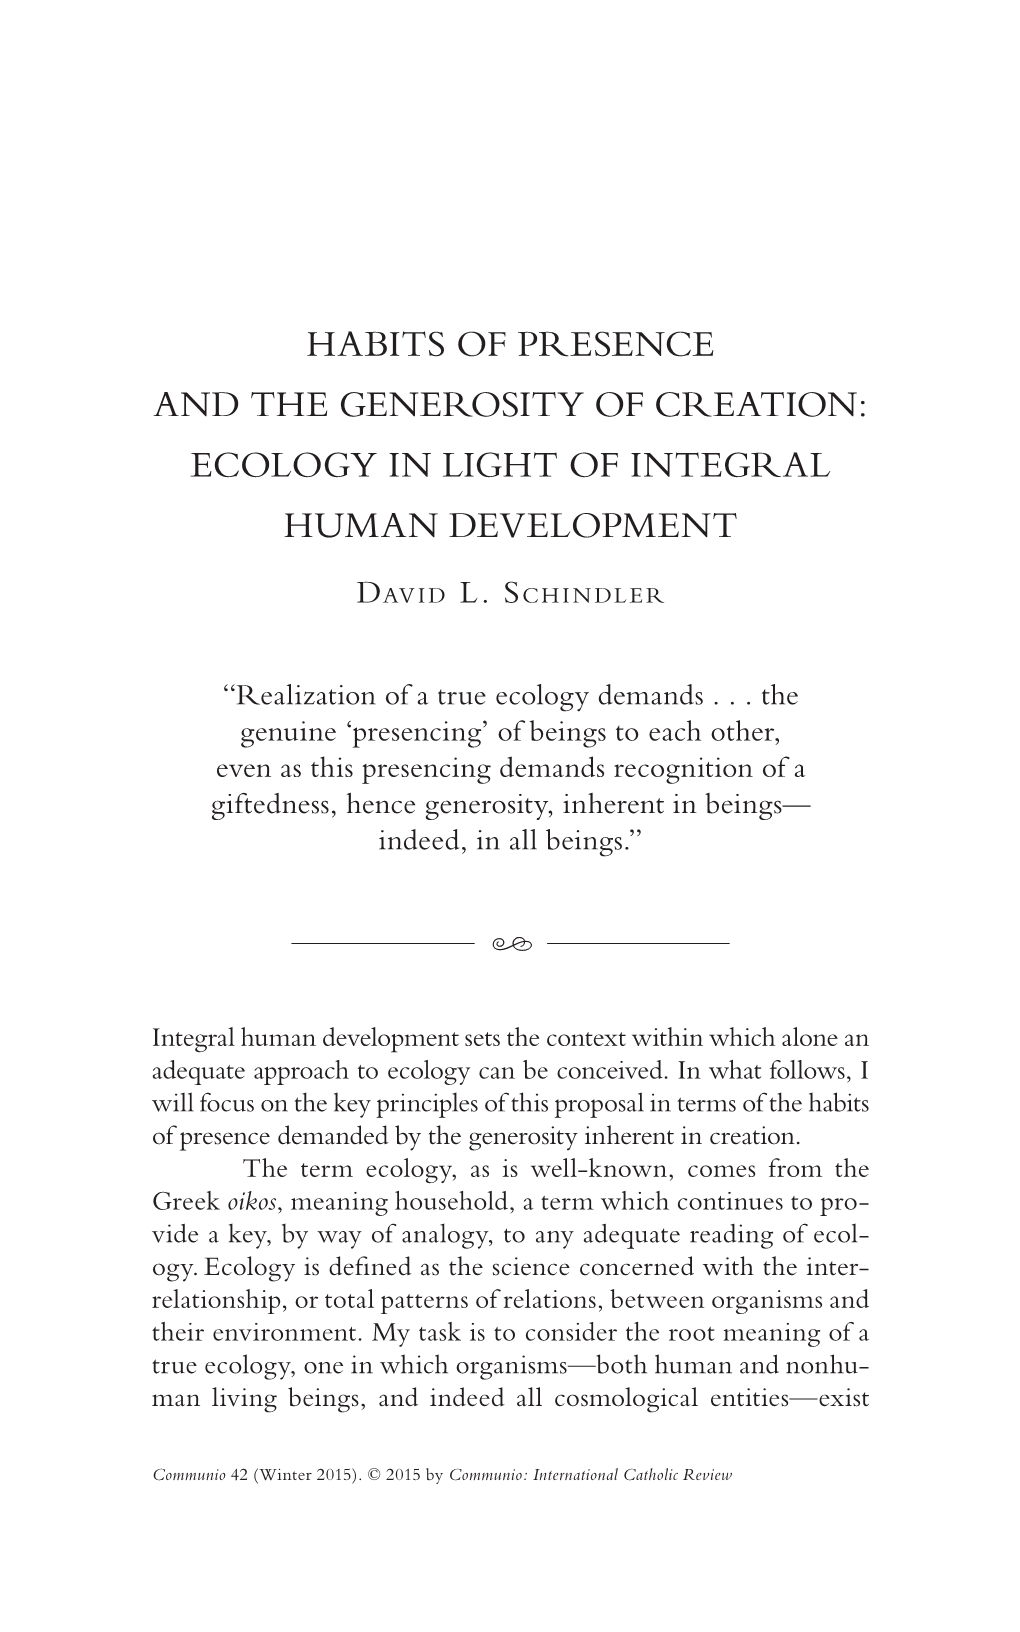 Habits of Presence and the Generosity of Creation: Ecology in Light of Integral Human Development